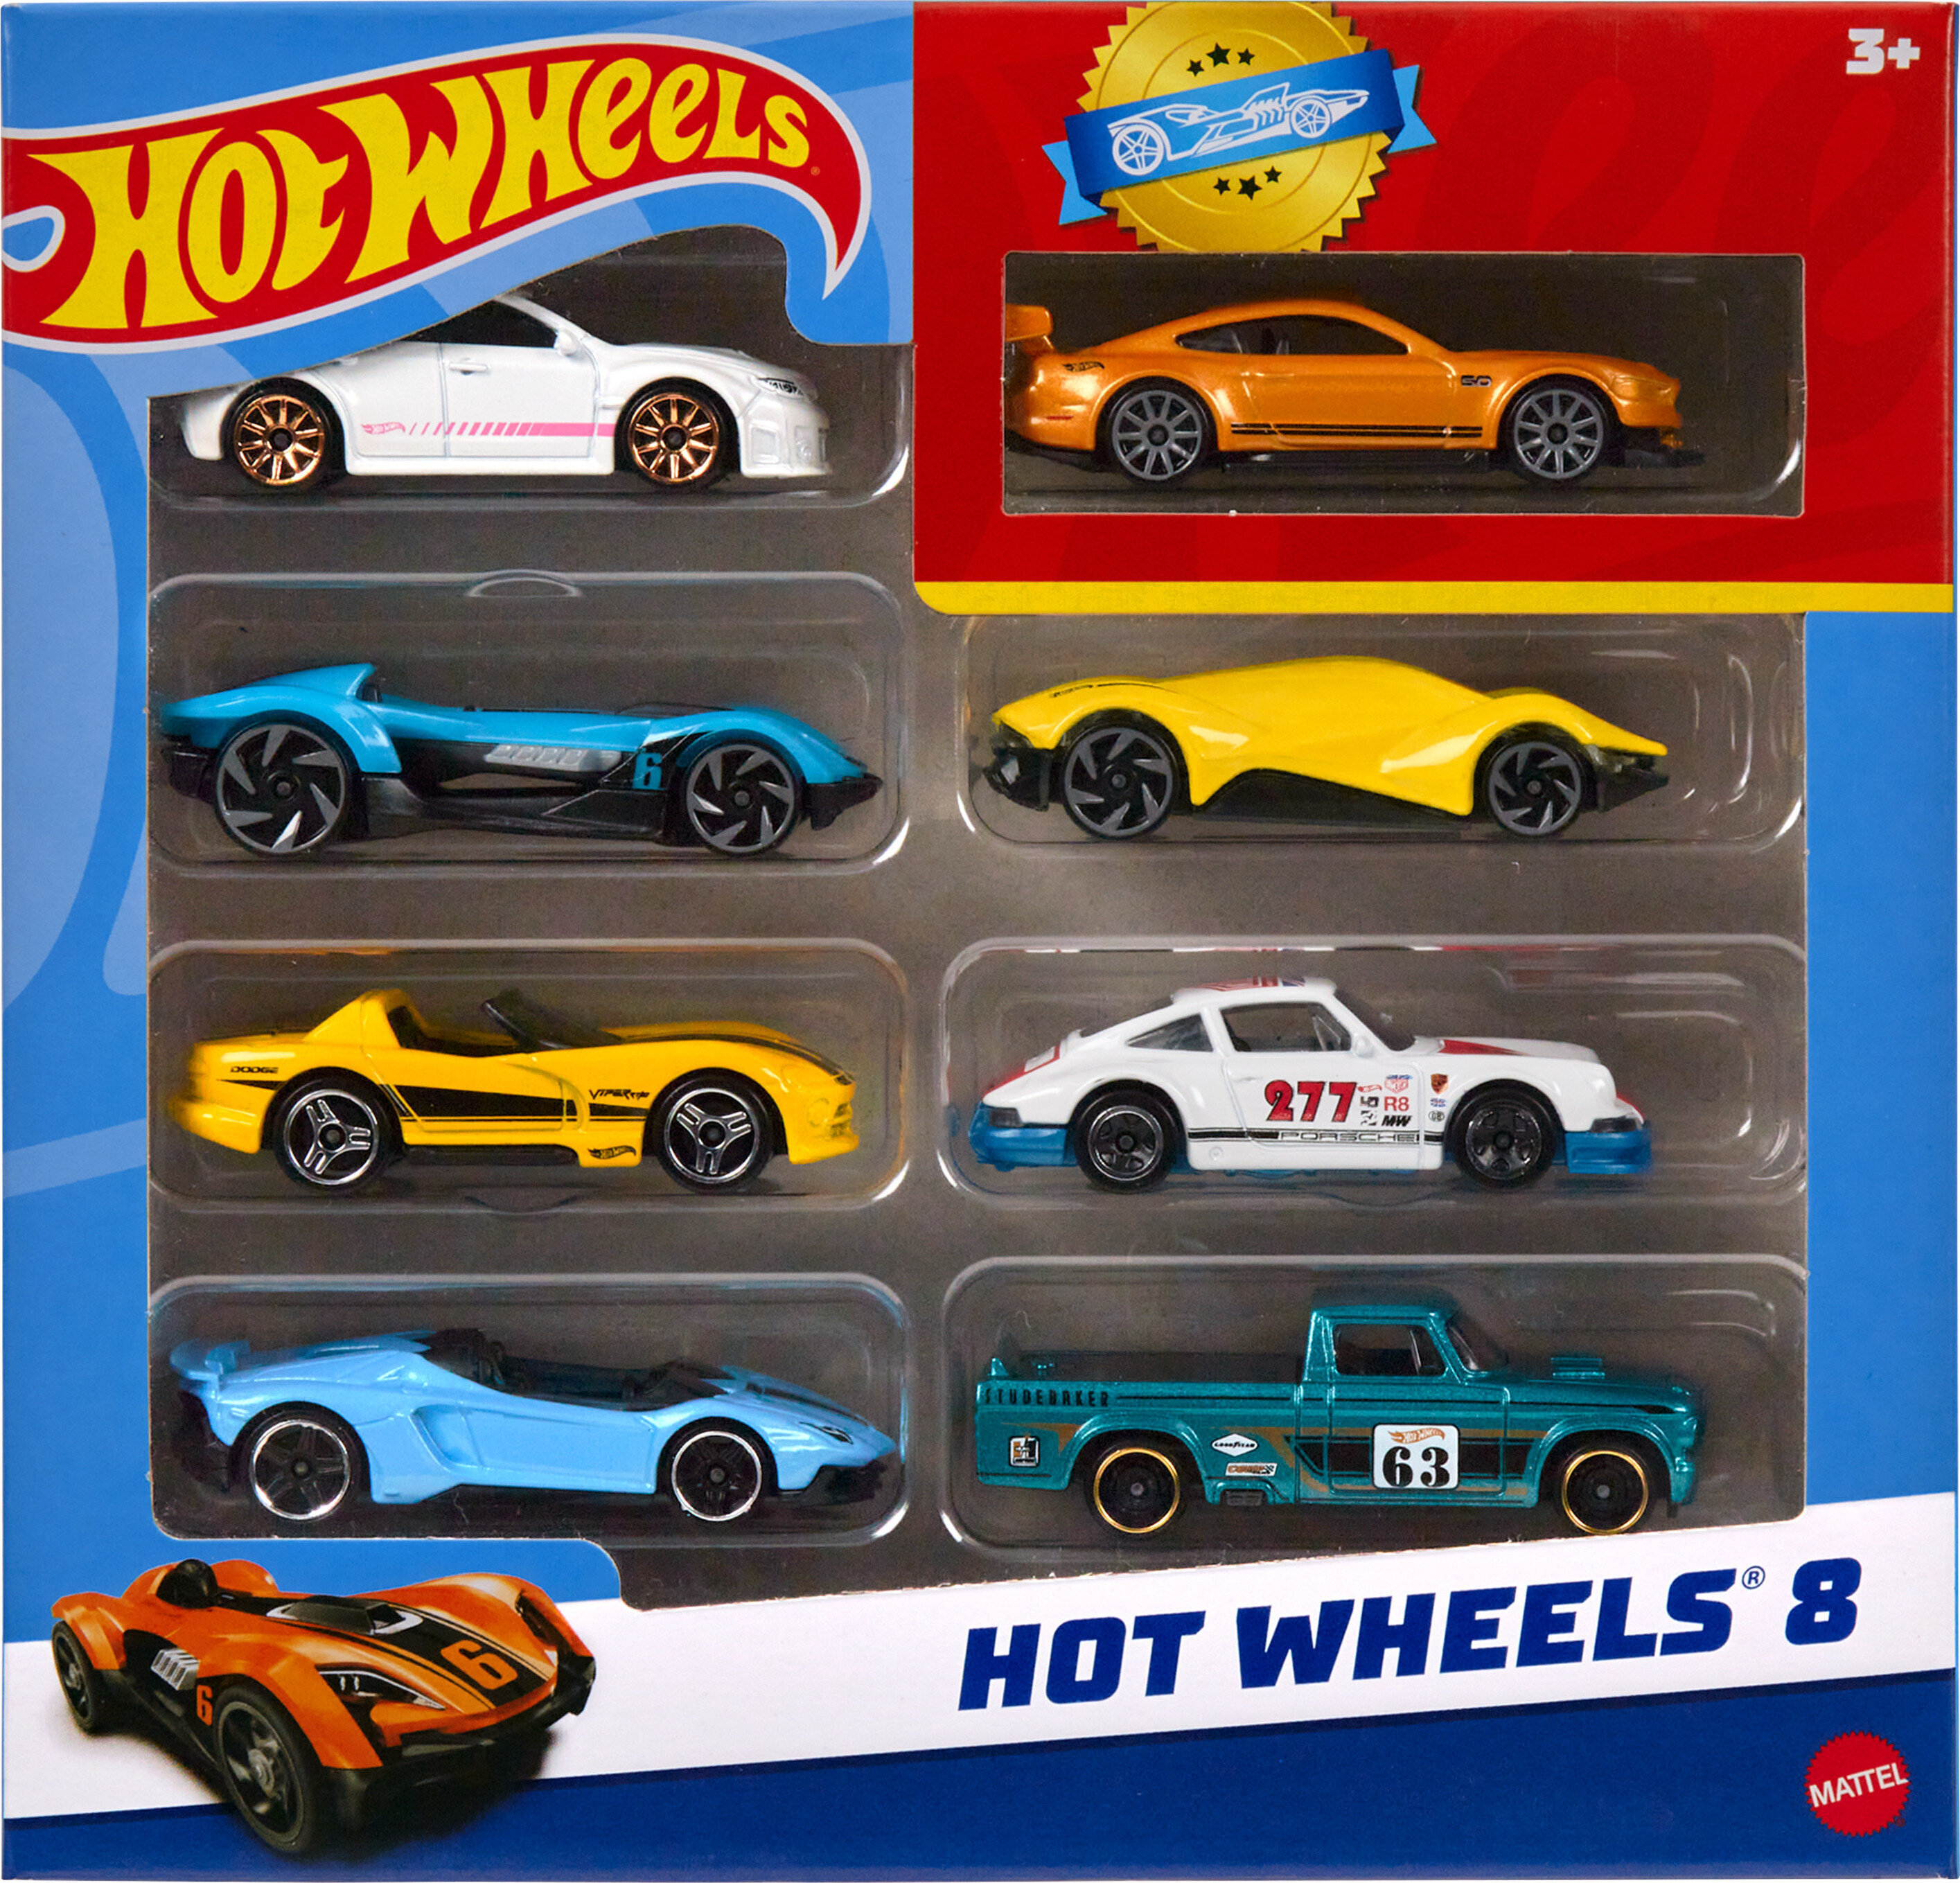 Hot Wheels Set of 8 Basic Toy Cars & Trucks in 1:64 Scale including 1 Exclusive Car, Styles May Vary - image 2 of 5